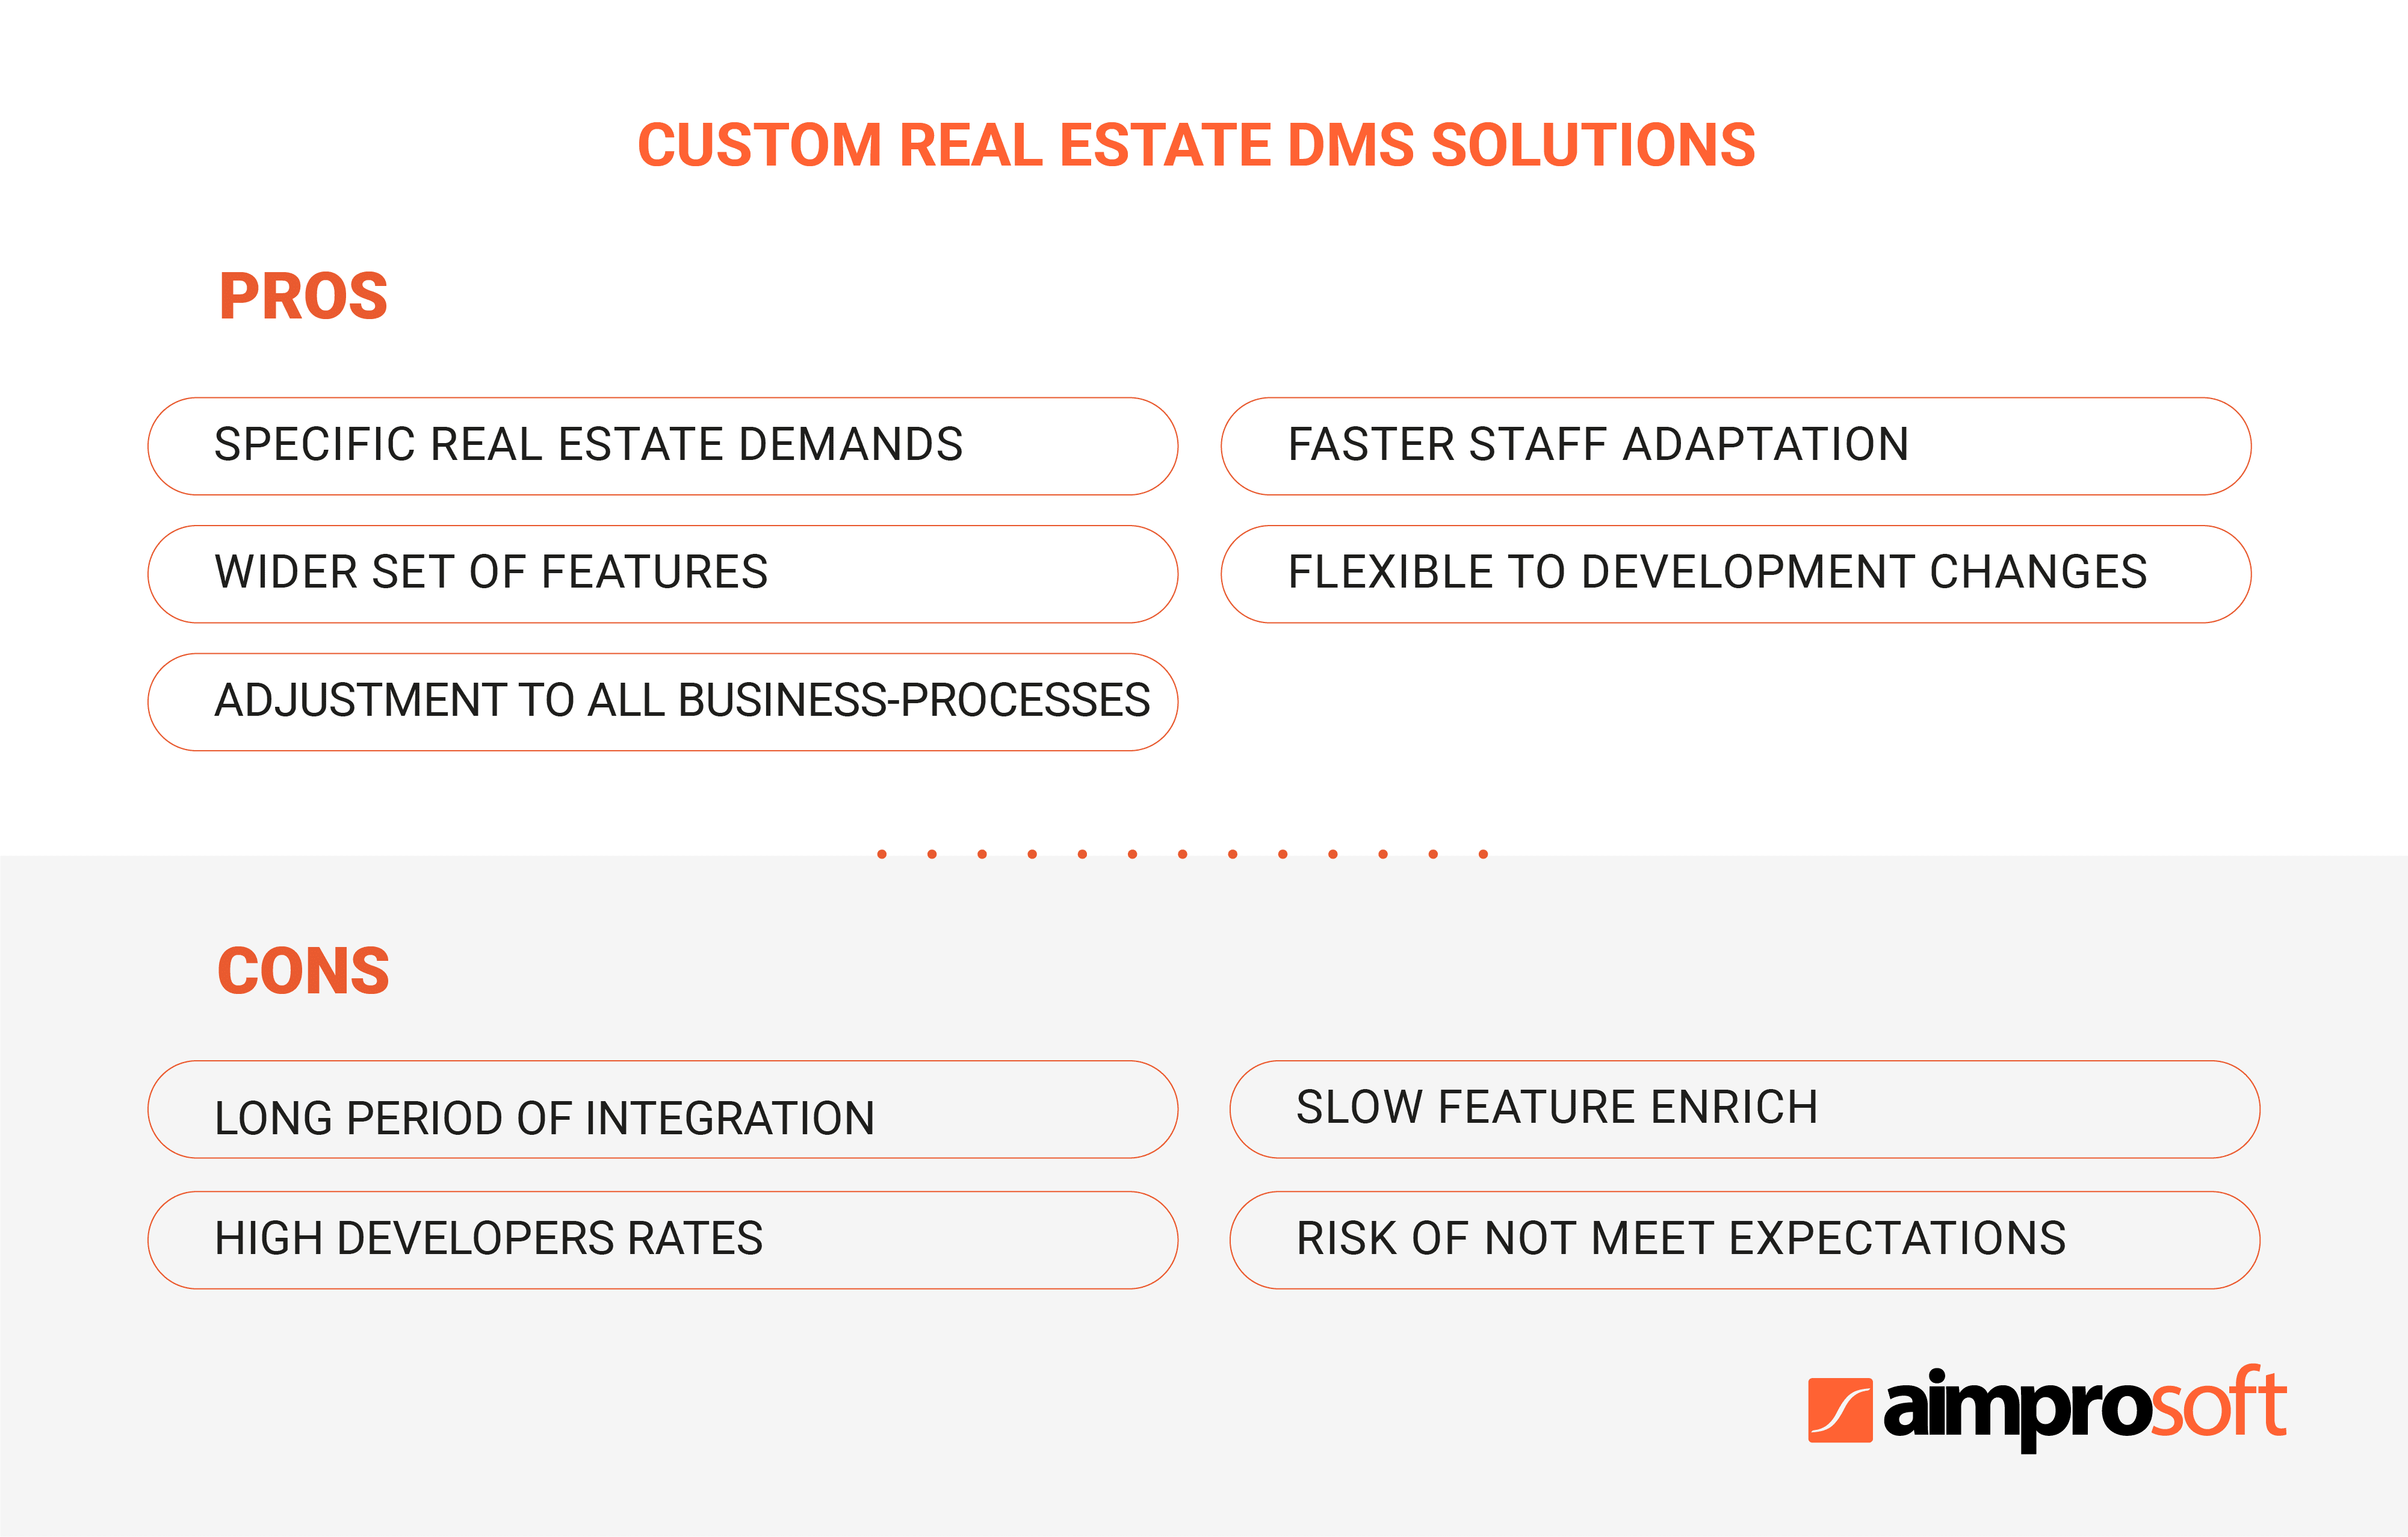 Real estate custom solution: pros and cons of document management software